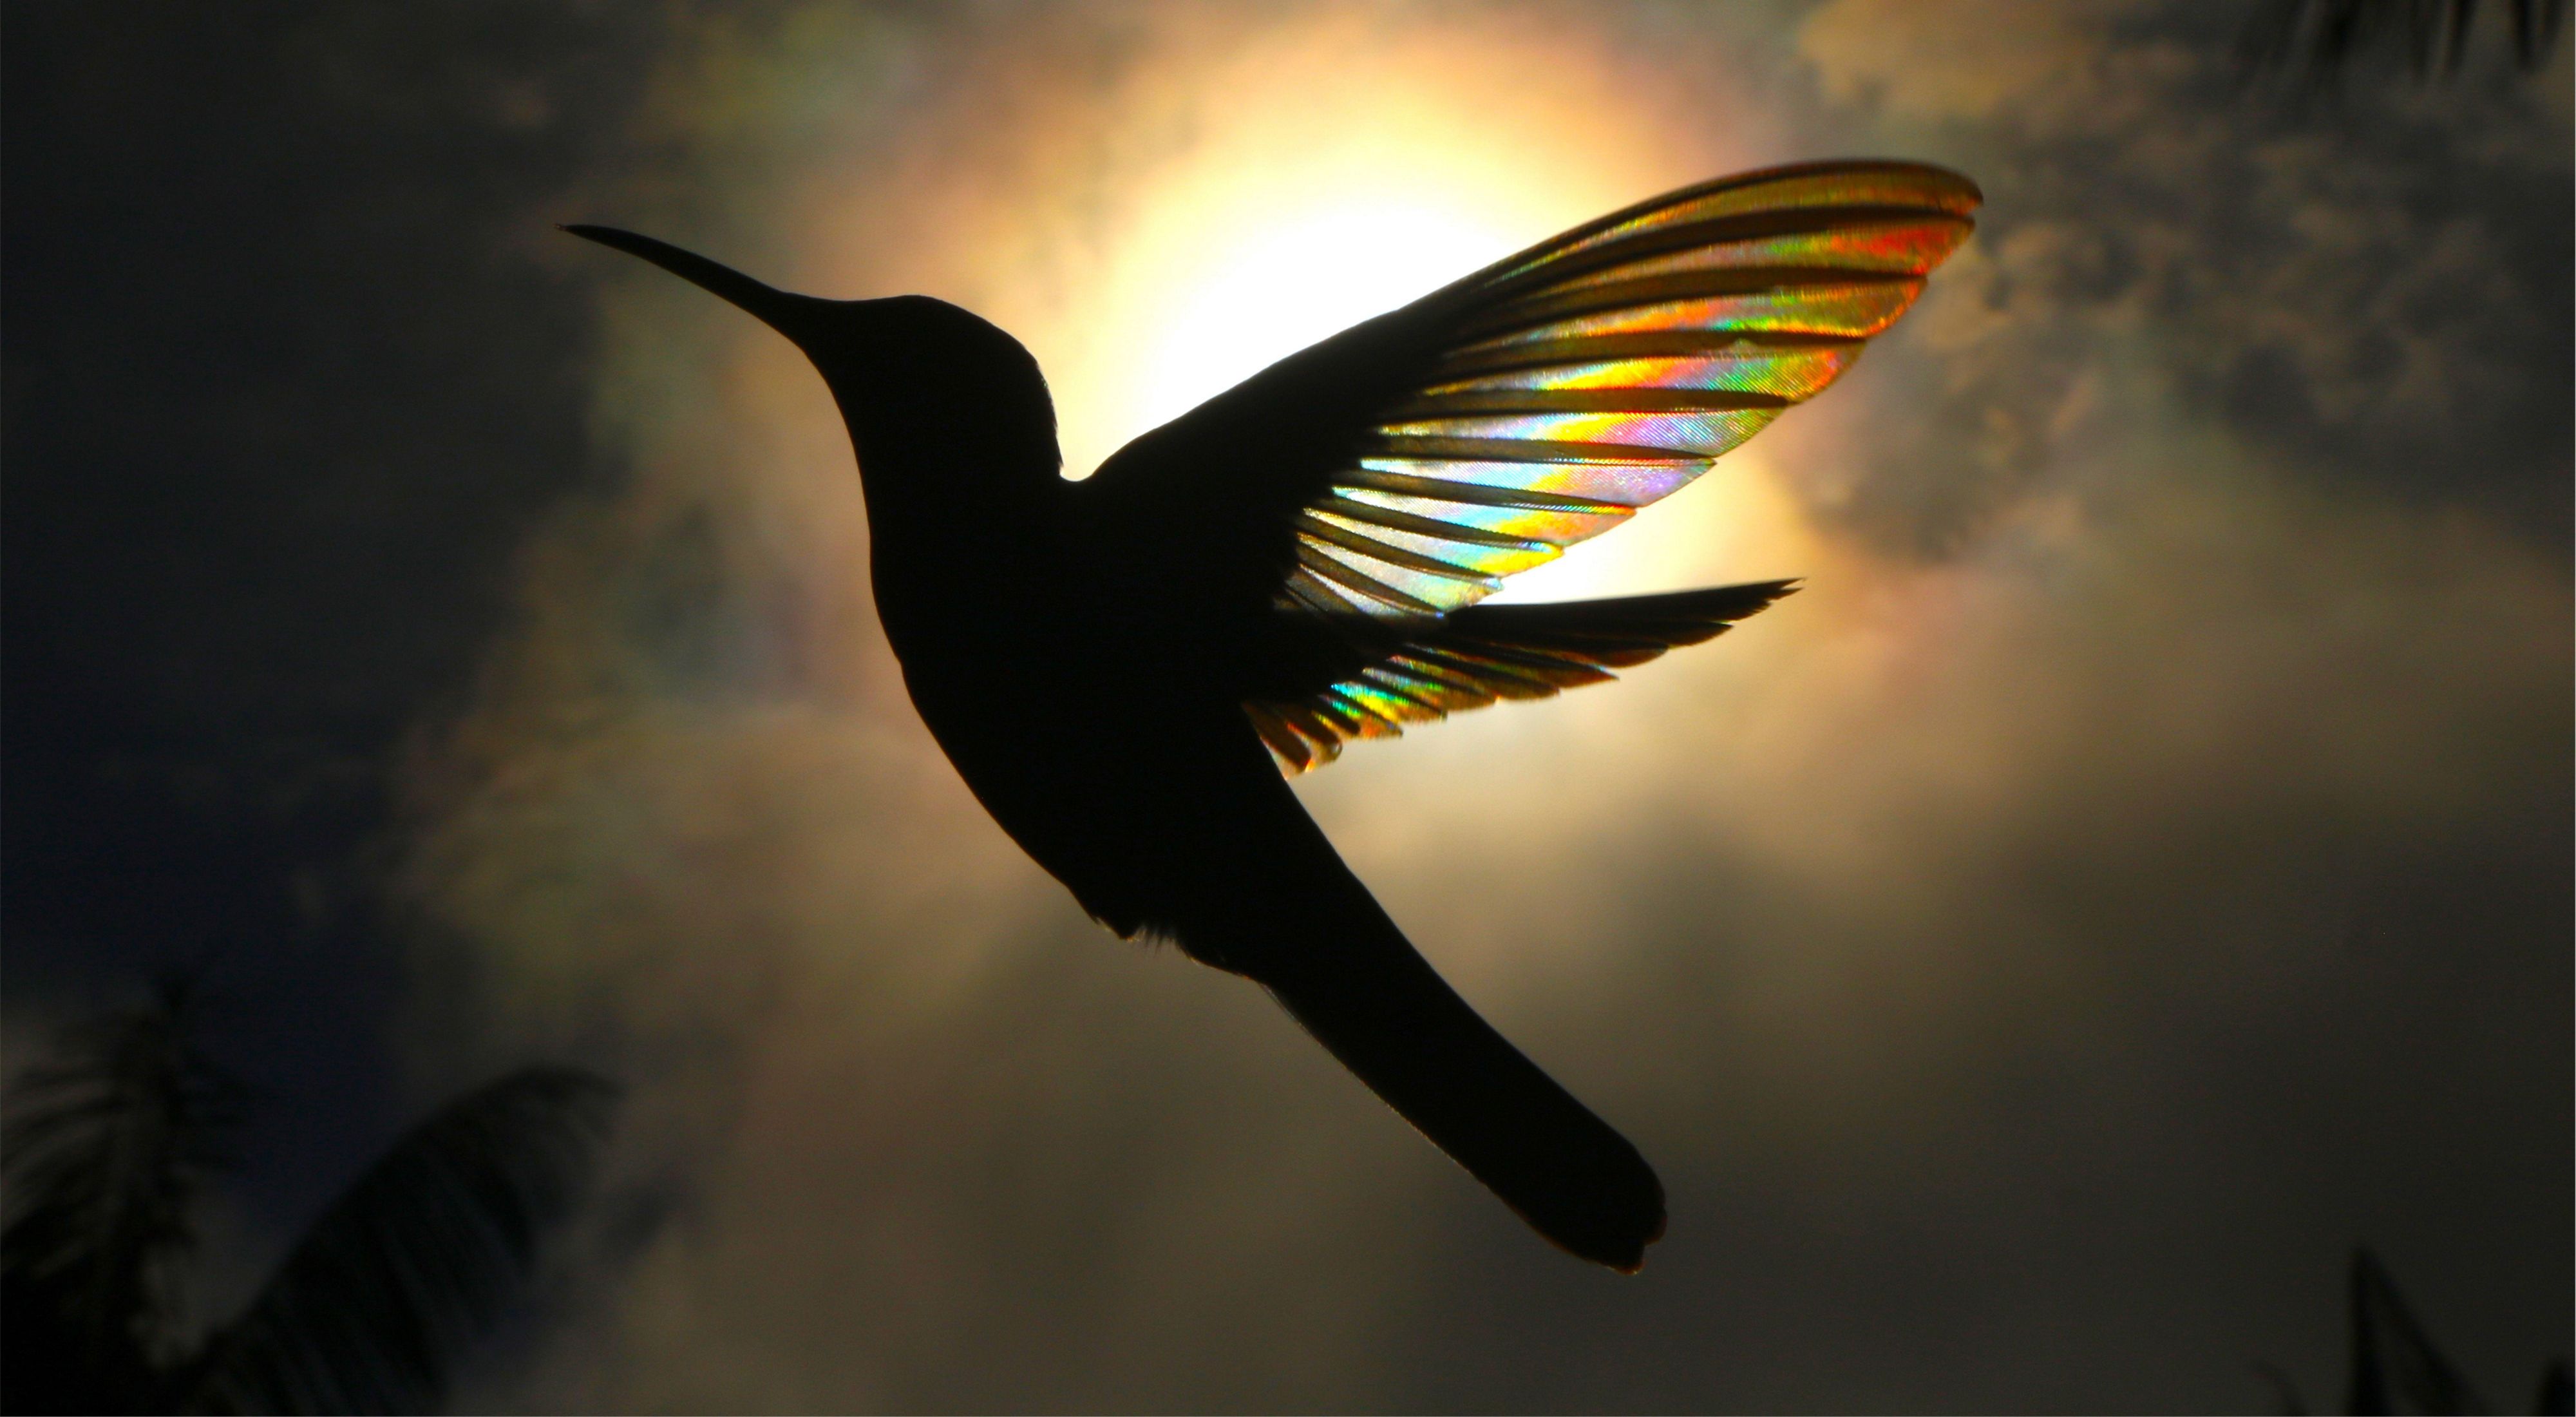 the silhouette of a hummingbird flying, with sun shining through its wings creating a rainbow effect